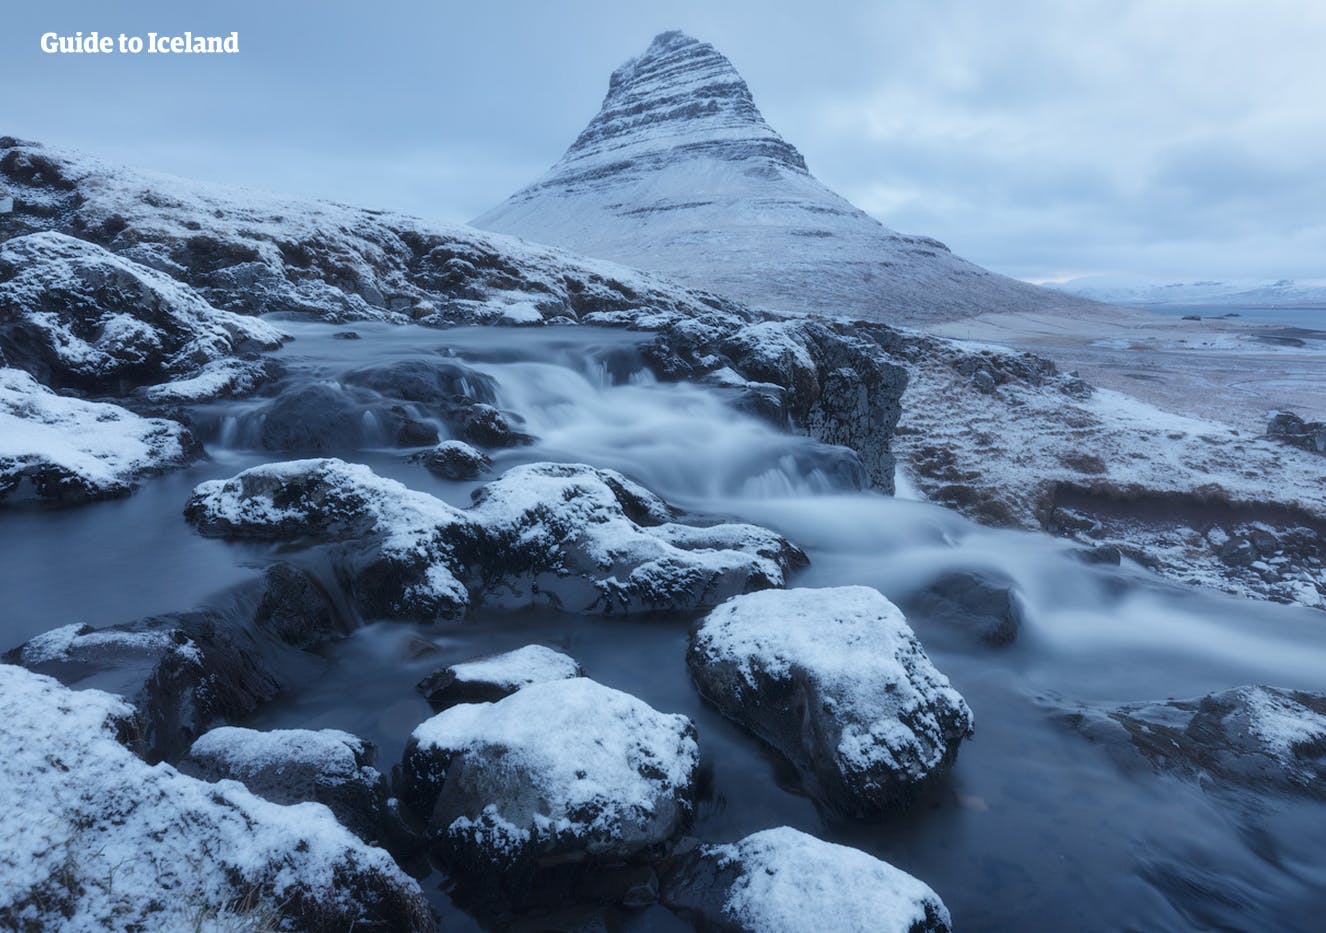 The frozen plains at the bottom of the most photographed mountain in Iceland, Kirkjufell.